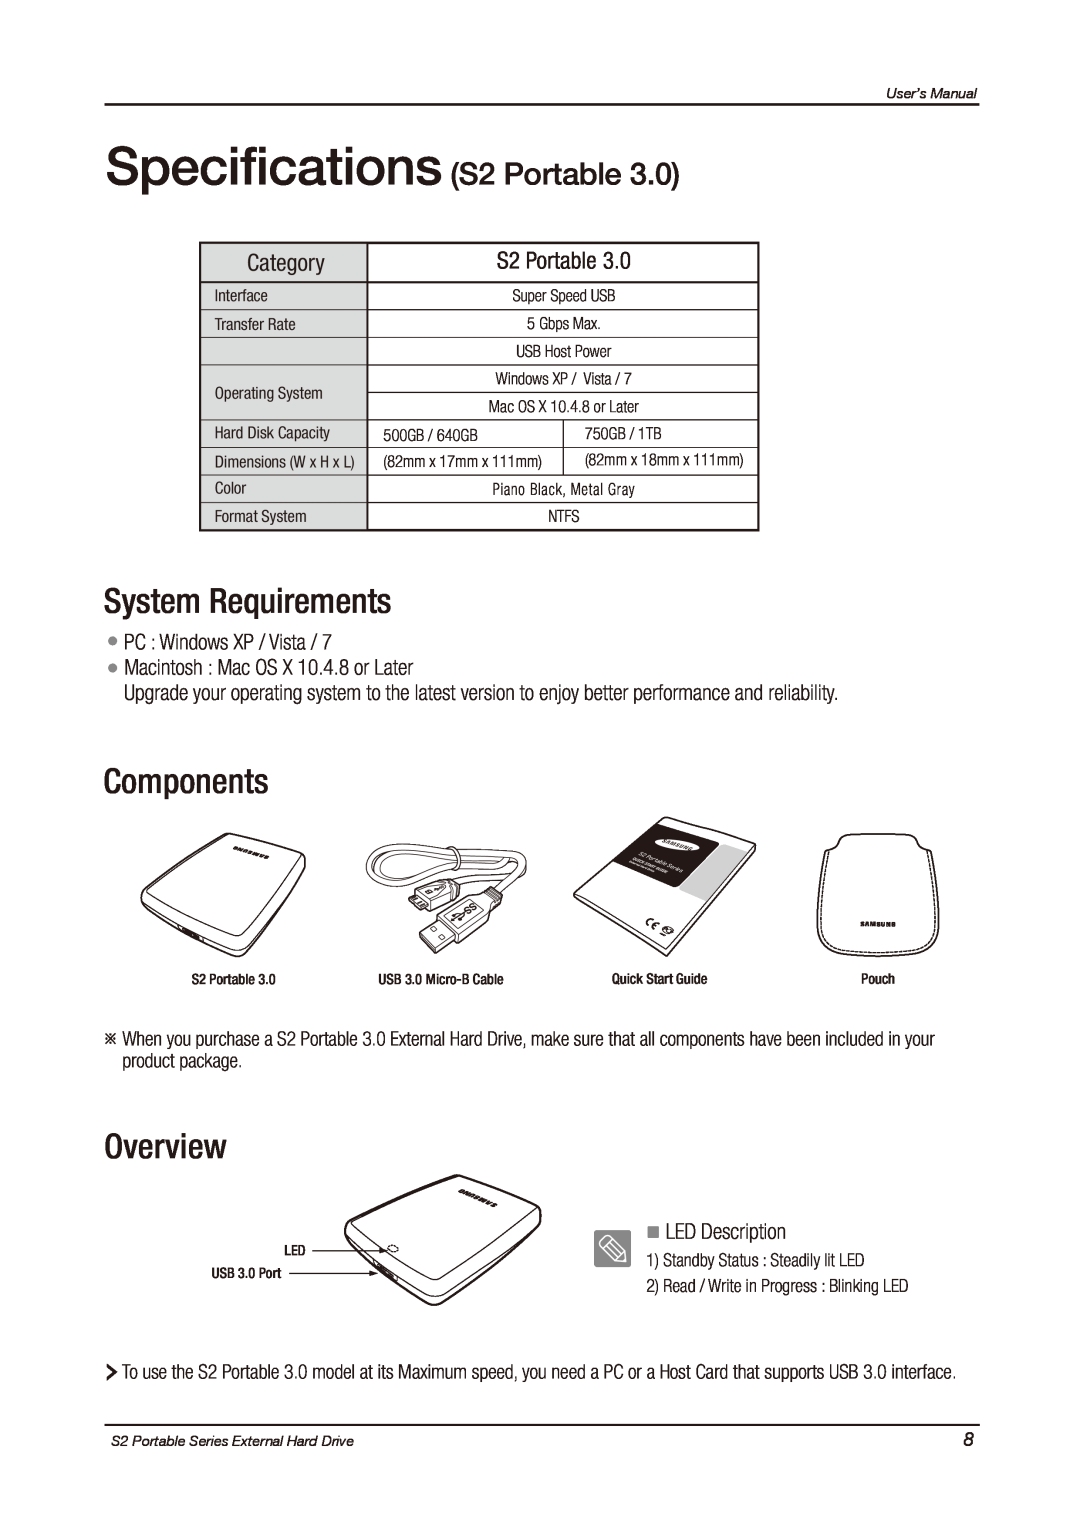 Samsung HXMU016DA System Requirements, Components, Overview, Specifications S2 Portable, Category, LED Description, Ntfs 